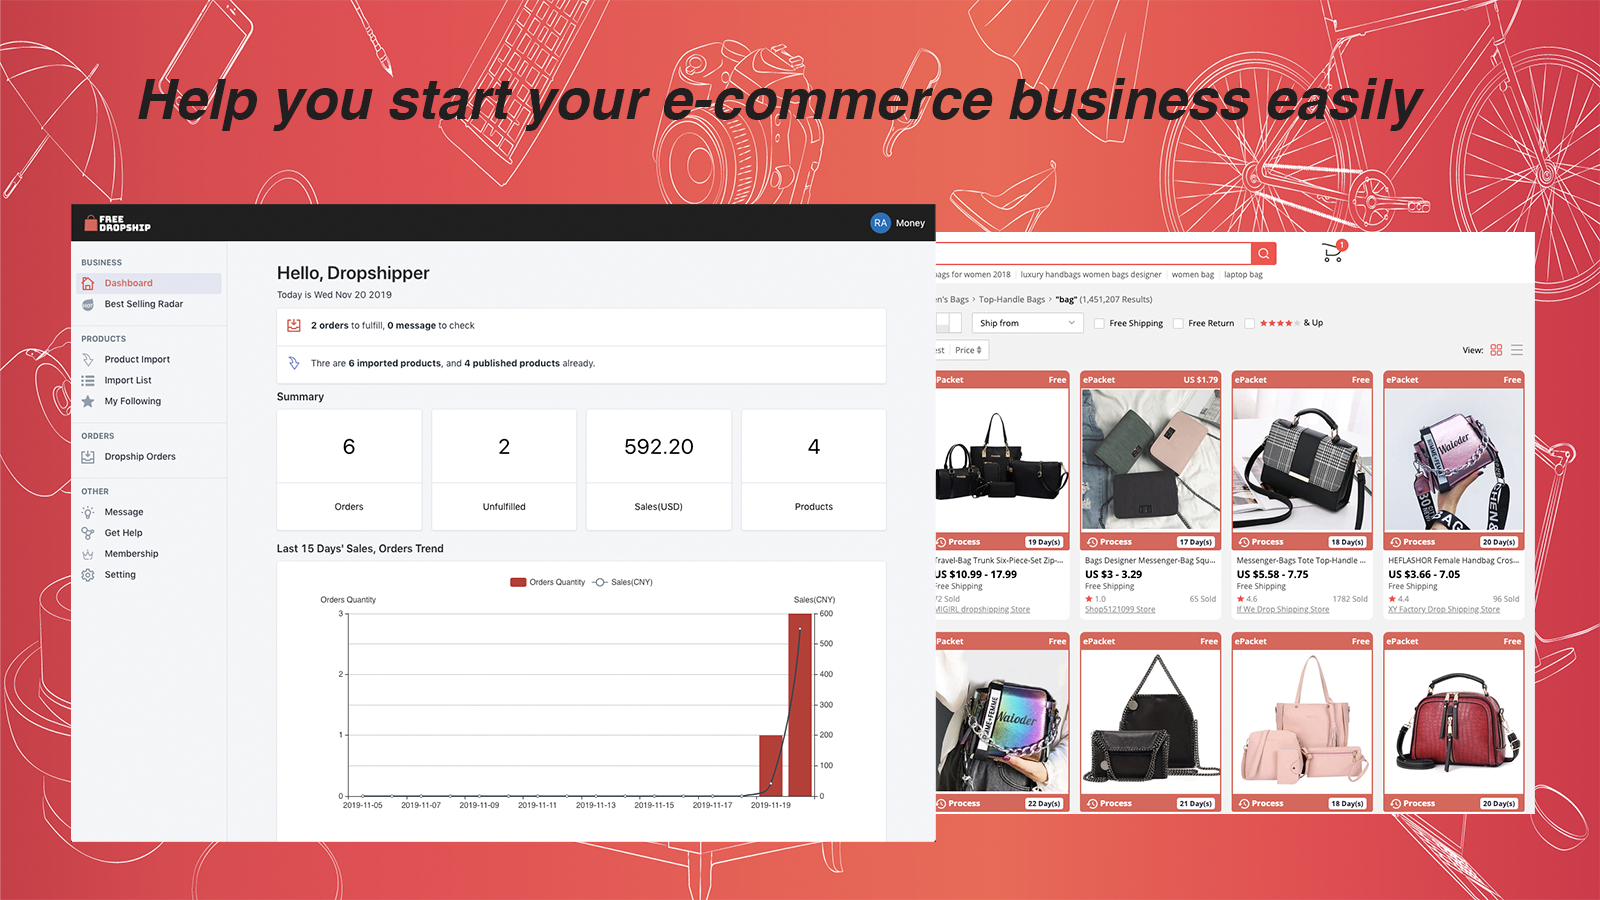 It helps you easily start your e-commerce business